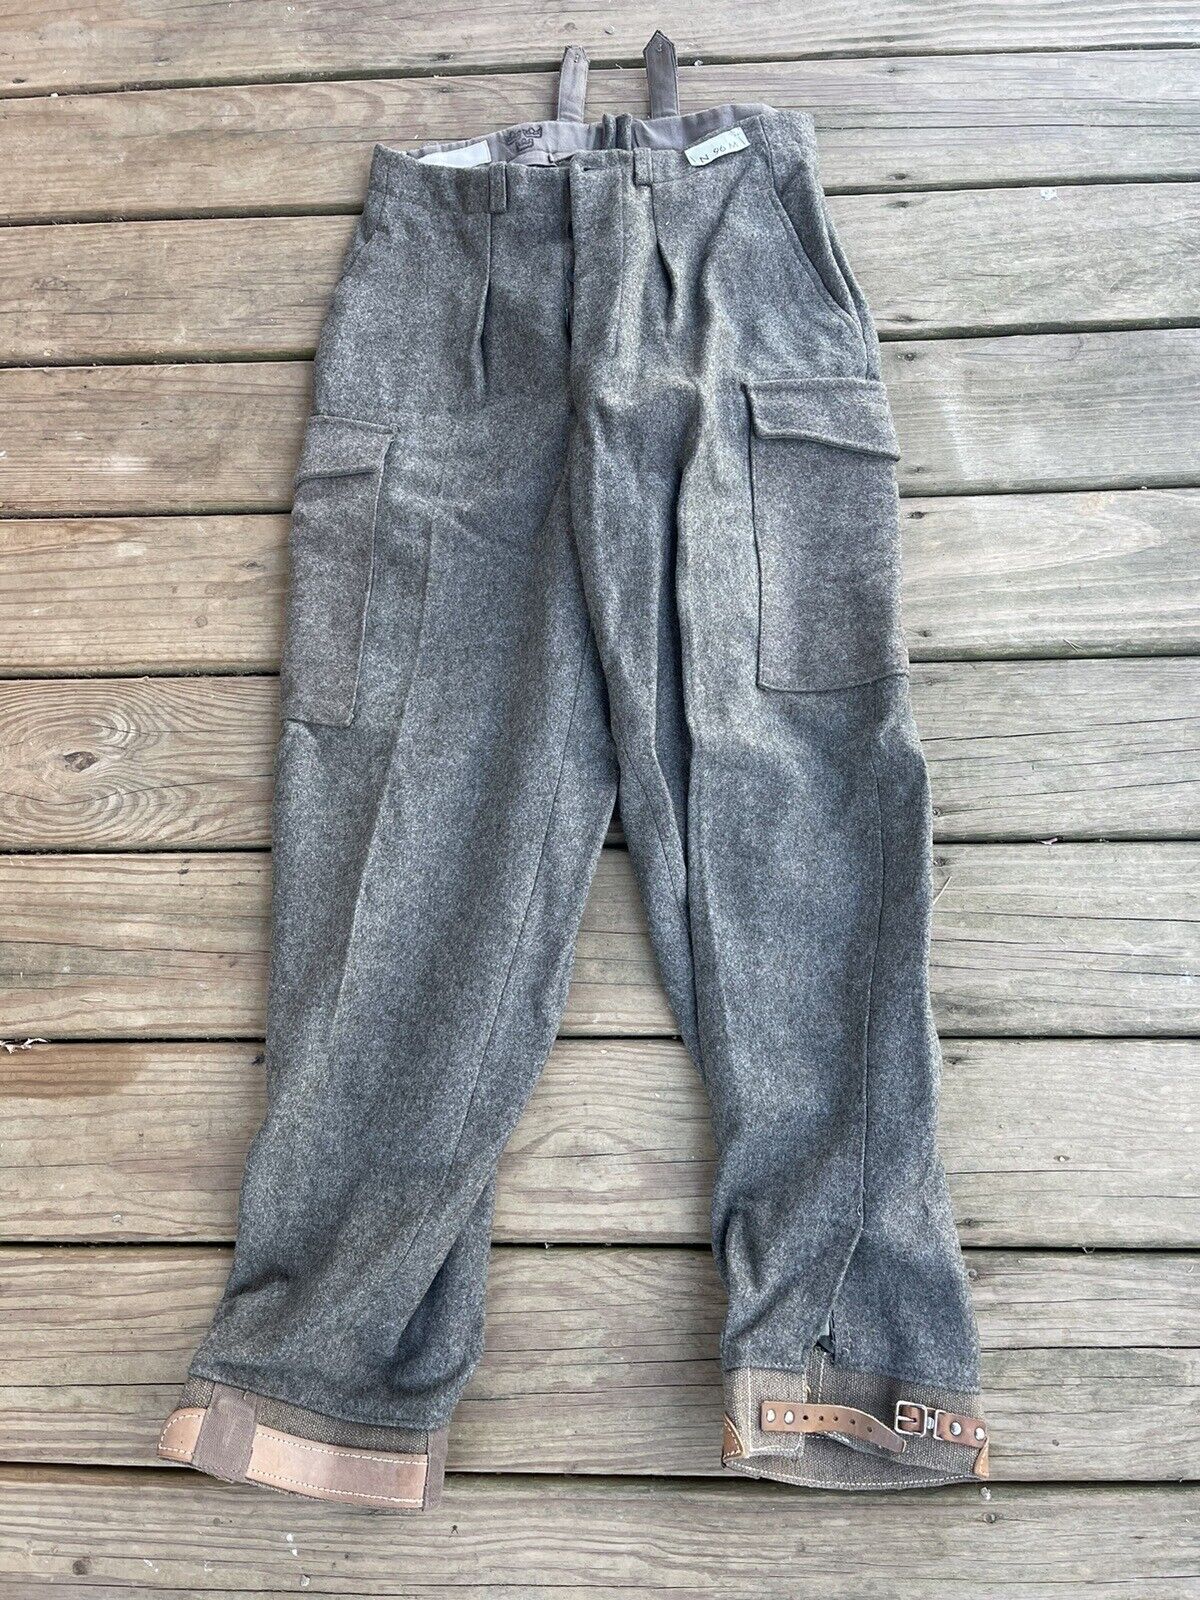 vintage NOS swedish WWII army pants WOOL sweden military CARGO trousers winter